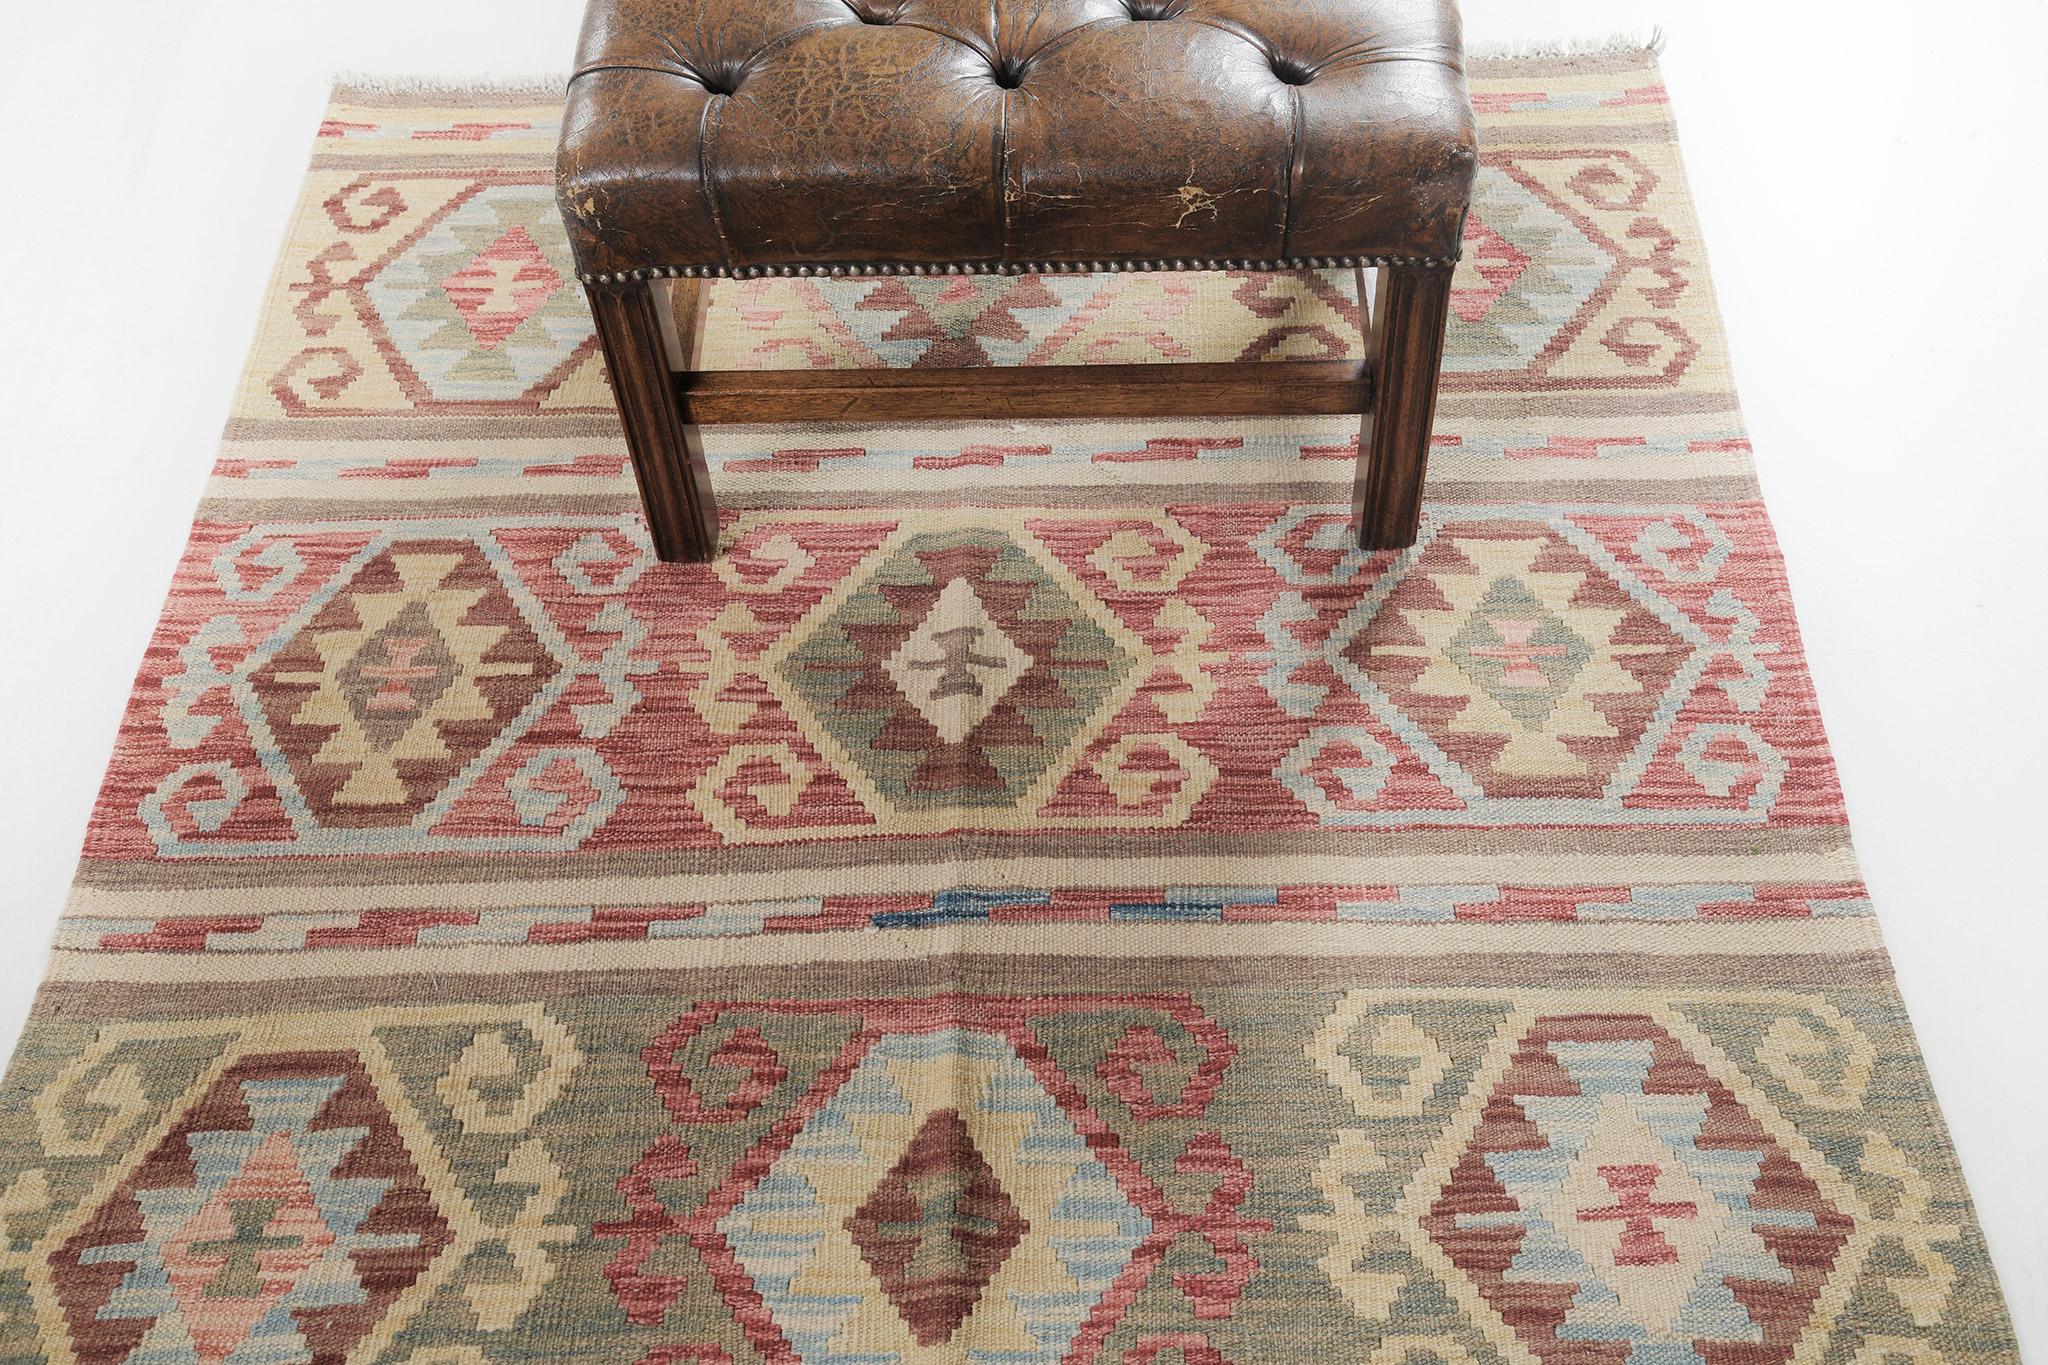 Modernize your little sanctuary with our vintage-styled Kilim which is made out of wool. All the diamond patterns and motifs blend to construct a stunning panel pattern. Its earthy tone palette added to the uniqueness and elegance of this